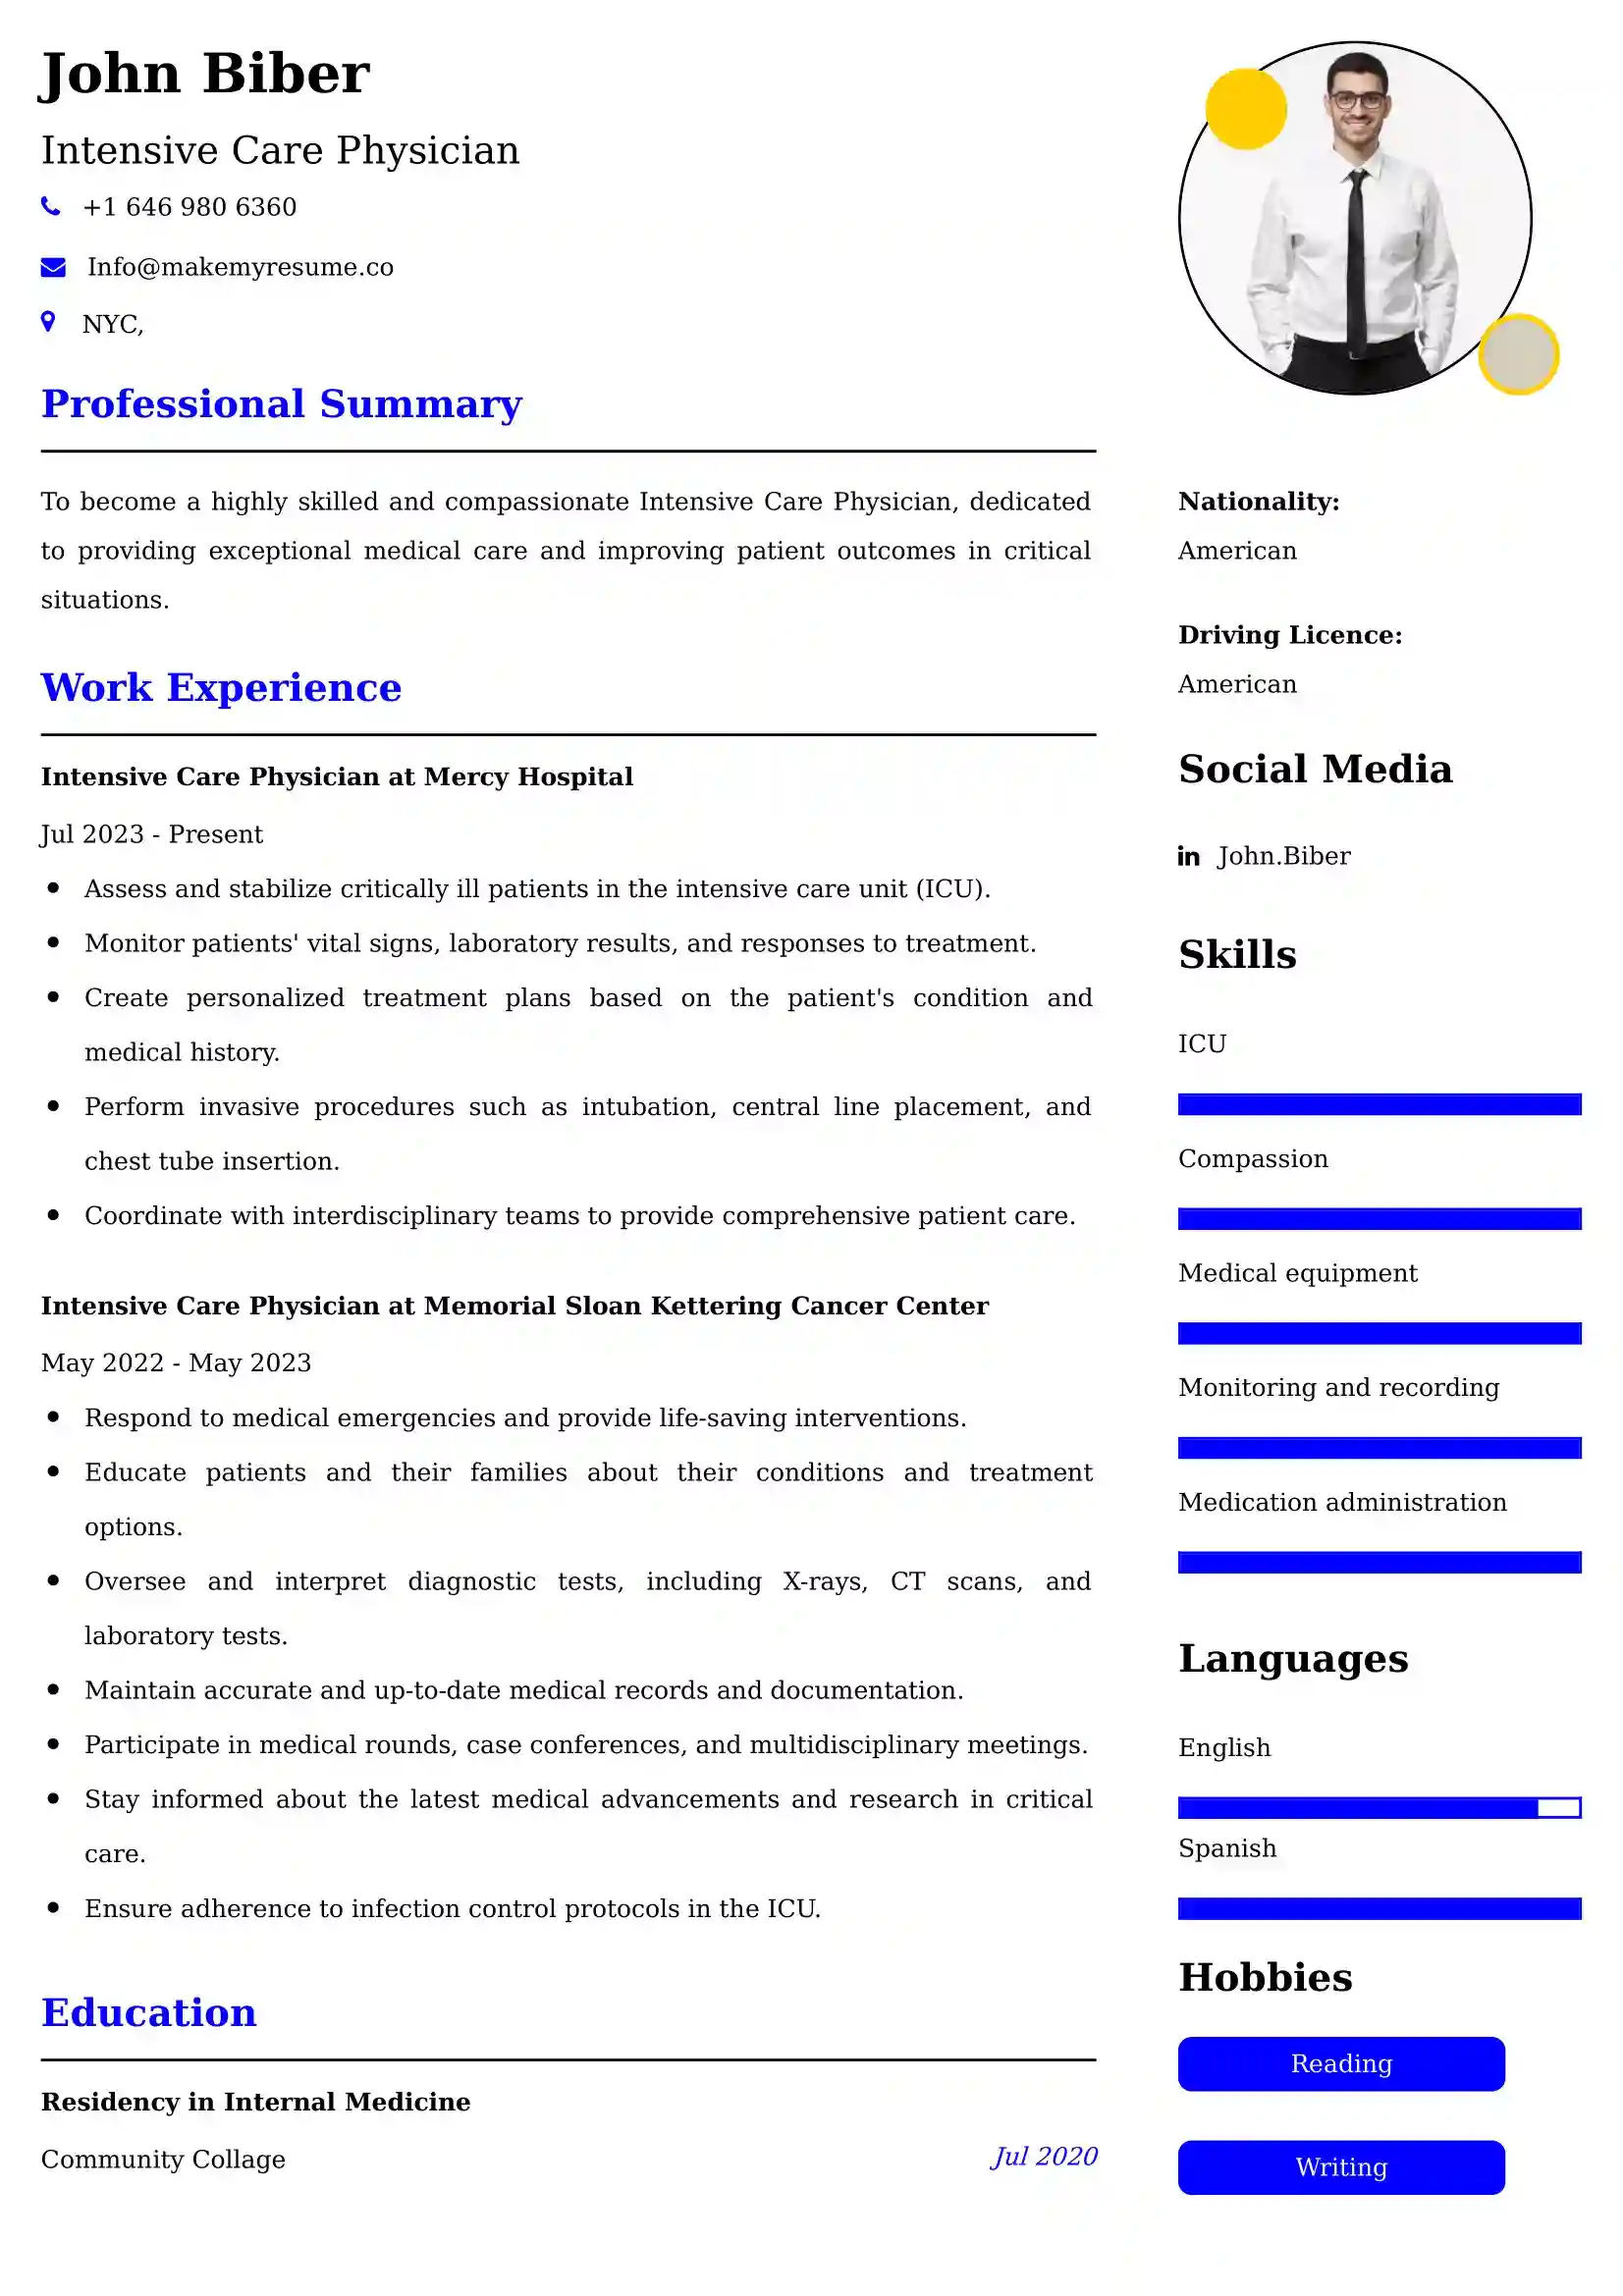 Intensive Care Physician Resume Examples for UK Jobs - Tips and Guide